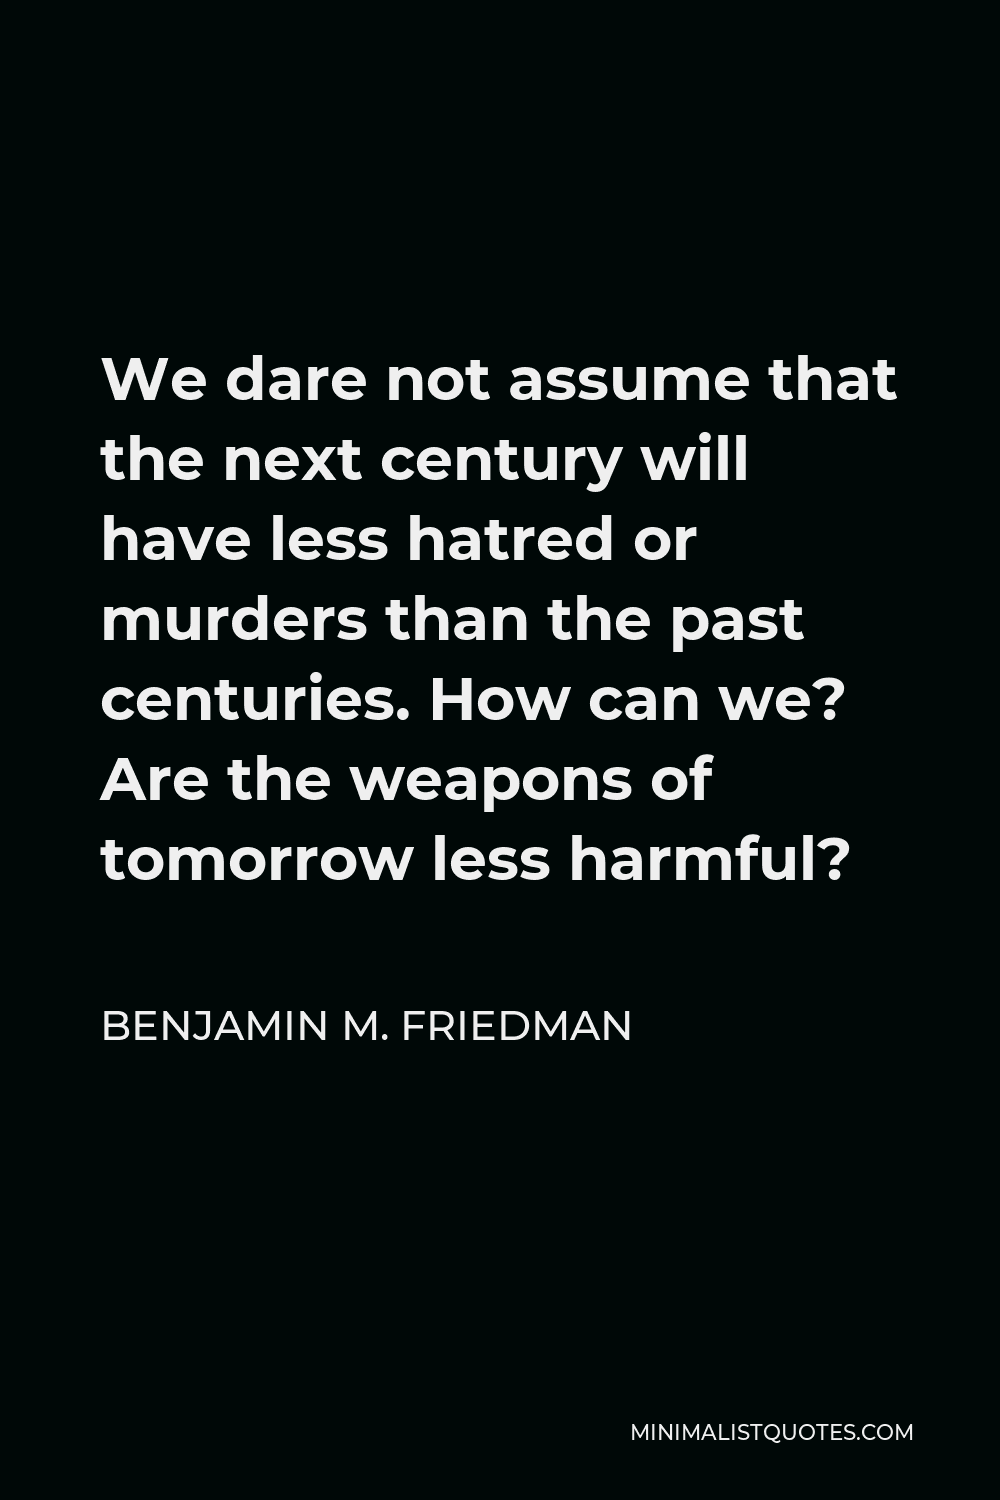 Benjamin M. Friedman Quote - We dare not assume that the next century will have less hatred or murders than the past centuries. How can we? Are the weapons of tomorrow less harmful?